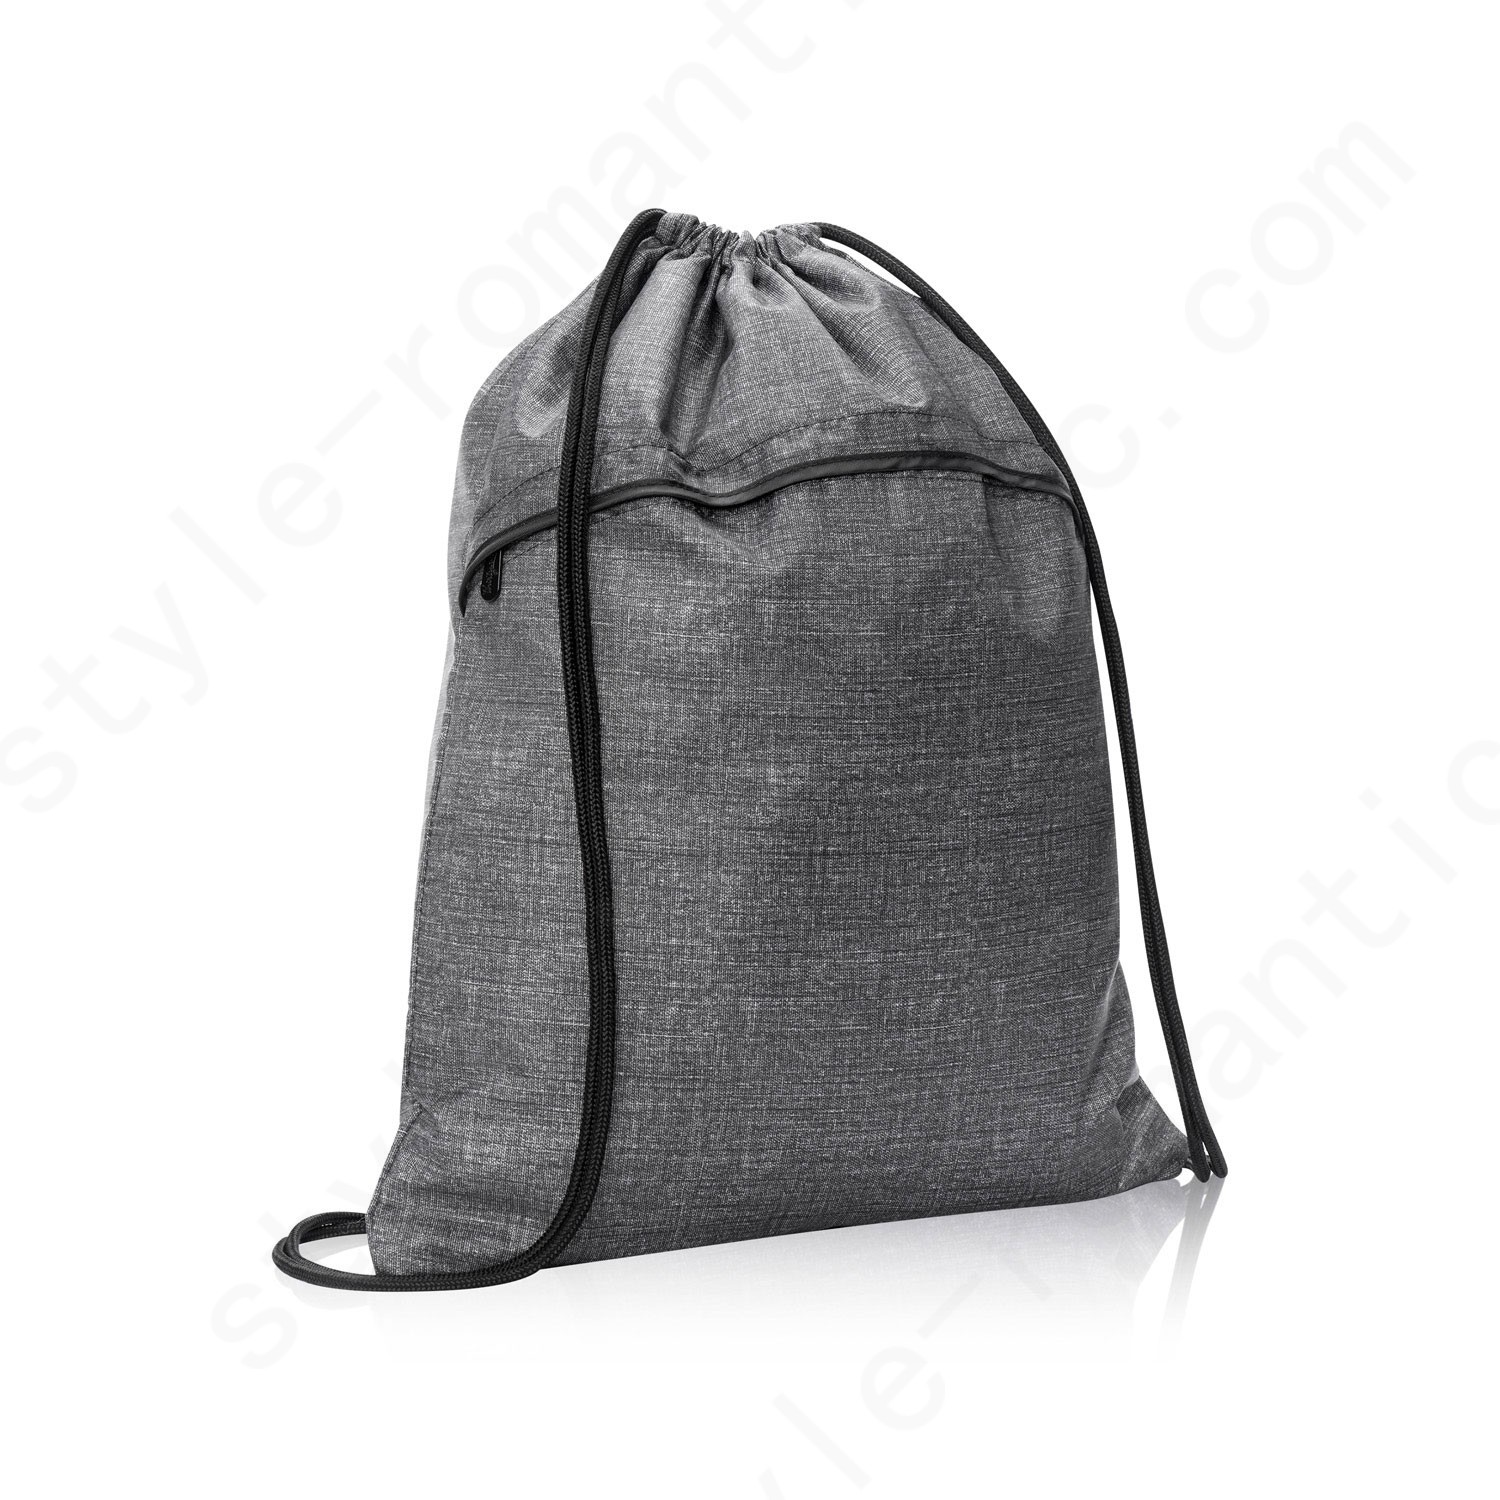 Thirty-One Gifts Cinch Sac - Charcoal Crosshatch - Thirty-One Gifts Cinch Sac - Charcoal Crosshatch